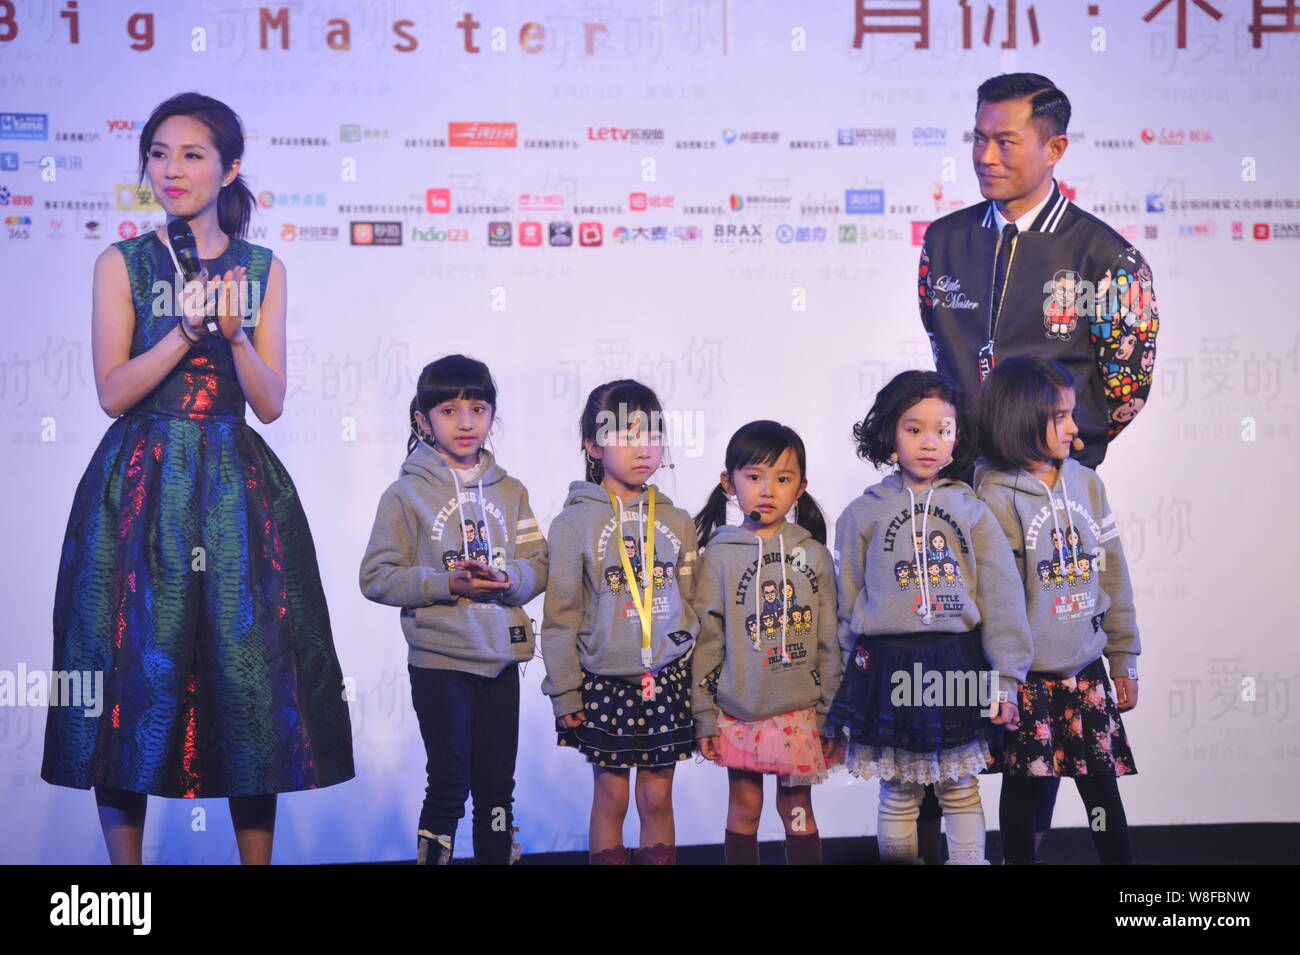 Hong Kong actress Miriam Yeung, left, and actor Louis Koo, right, pose with  young girls during the premiere for their new movie 